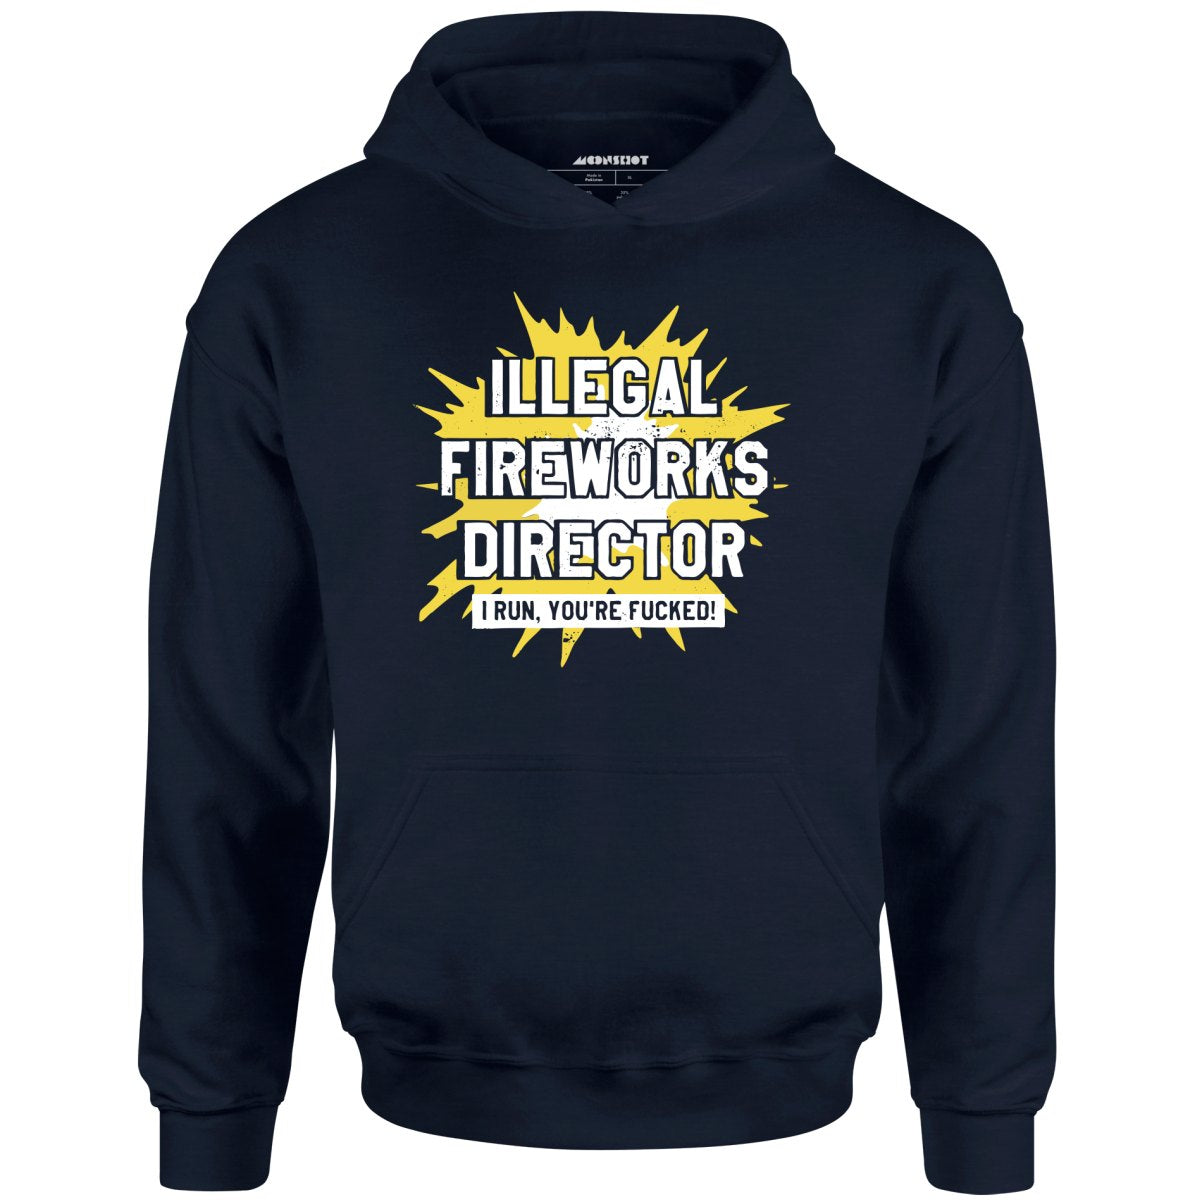 Illegal Fireworks Director I Run, You're Fucked - Unisex Hoodie